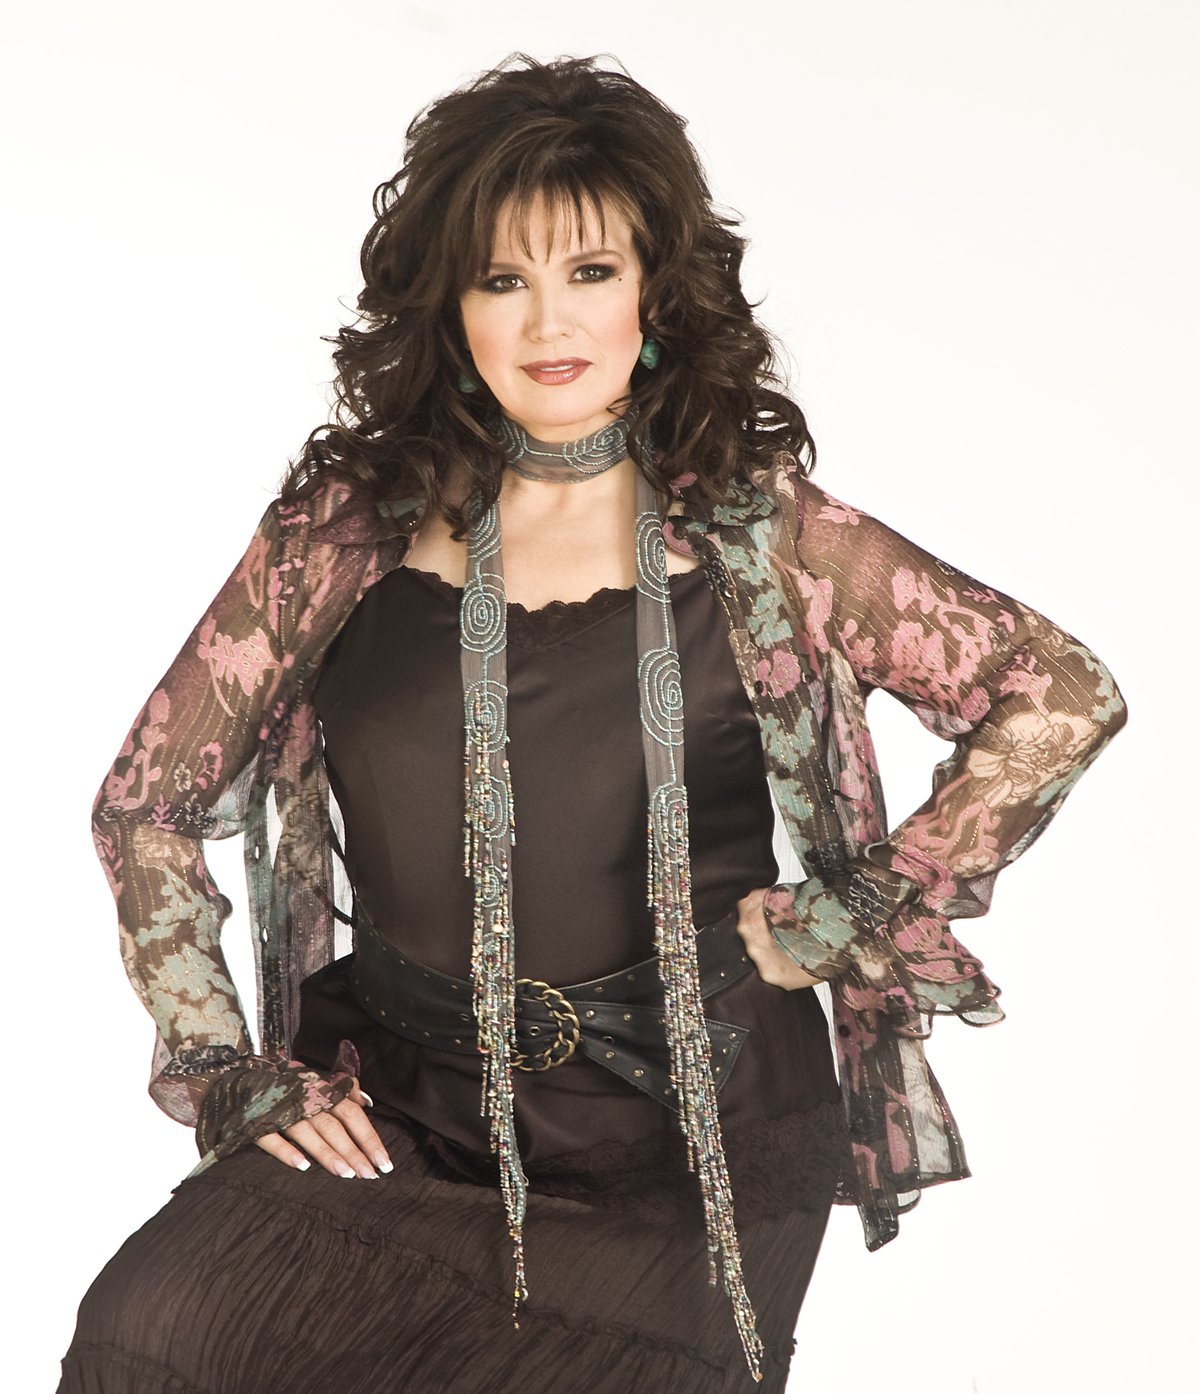 marie osmond recalls being body shamed as a teenager